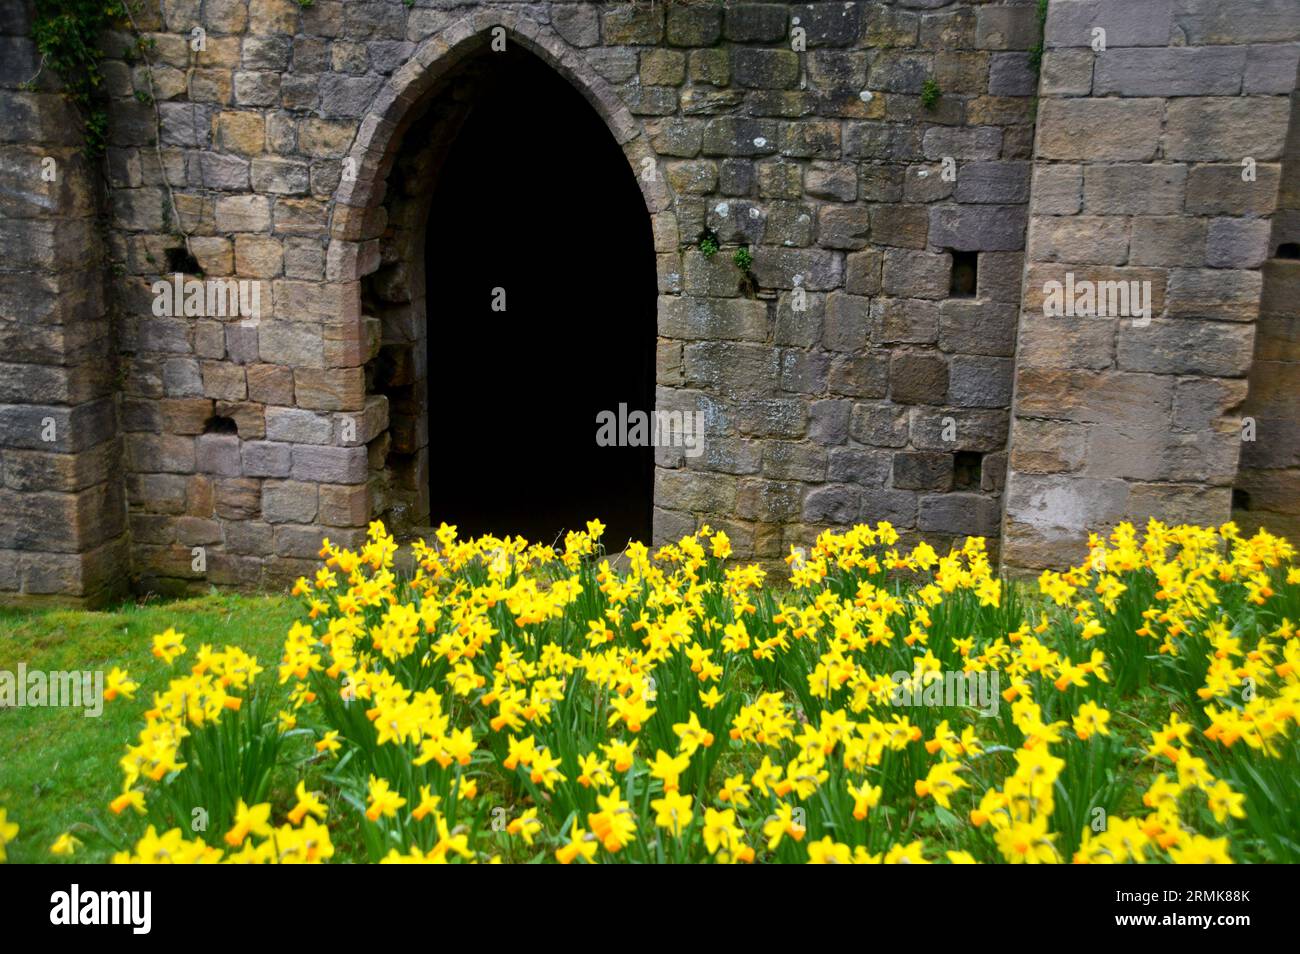 Spring Daffodils by a Stone Arched Doorway in the Ruins of Fountains Abbey, the Medieval Cistercian Monastery in North Yorkshire, England, UK. Stock Photo